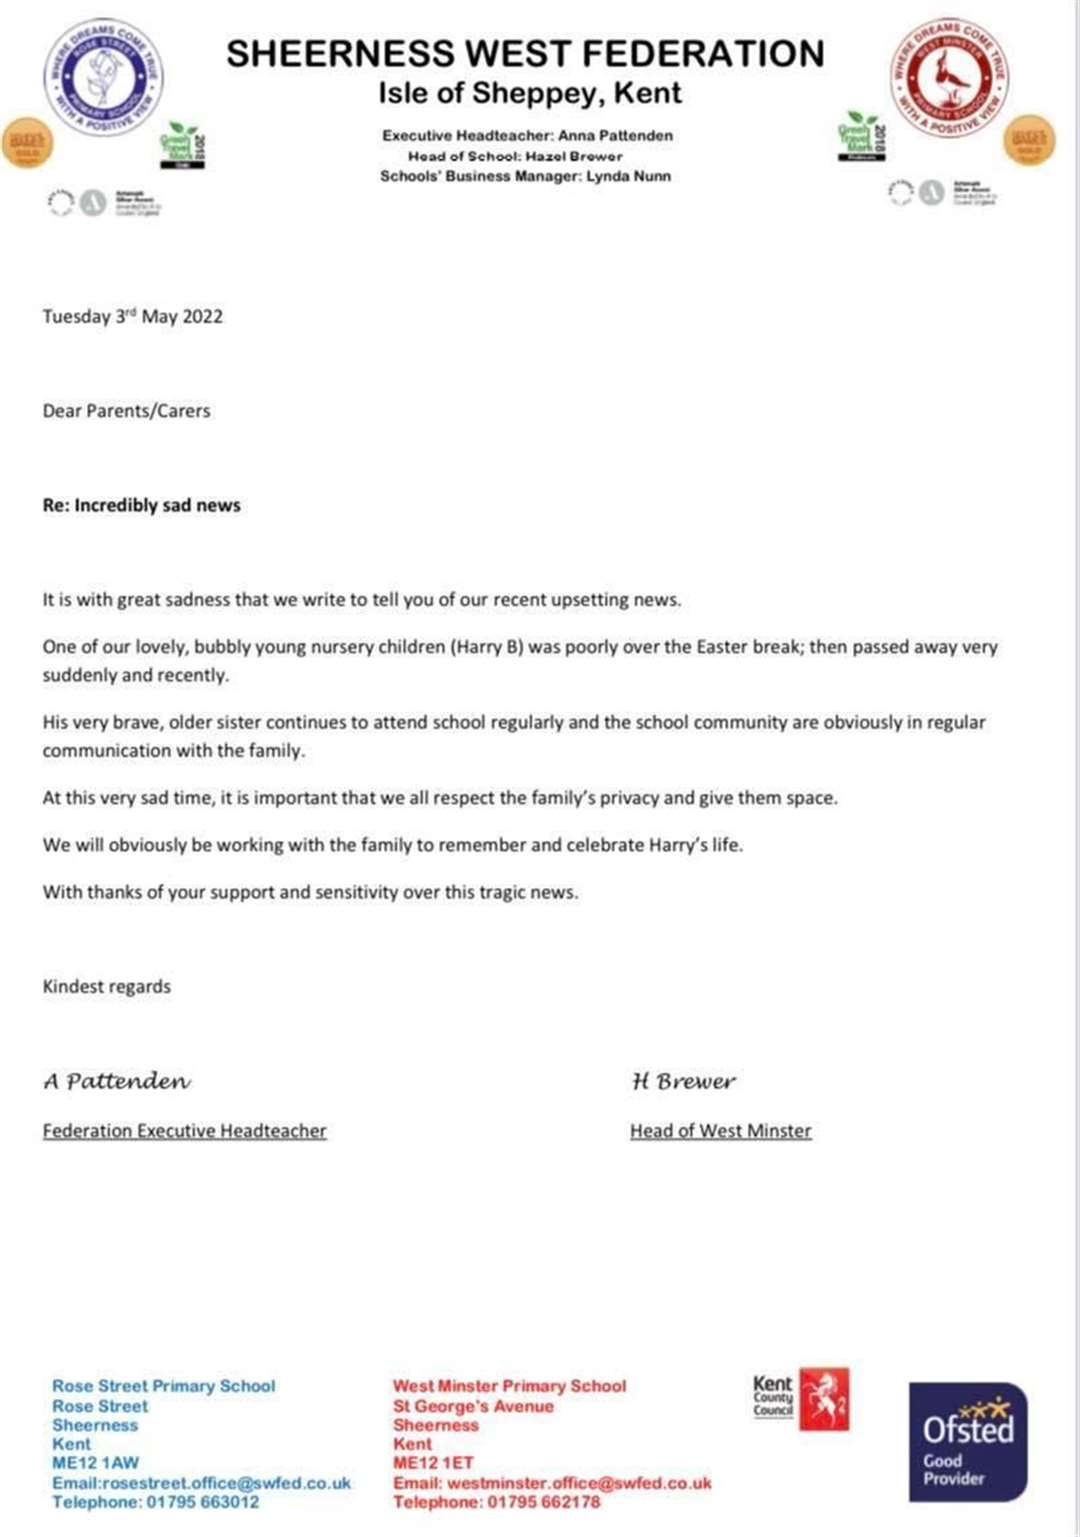 The letter published by West Minster Primary School following Harry Broughton's death